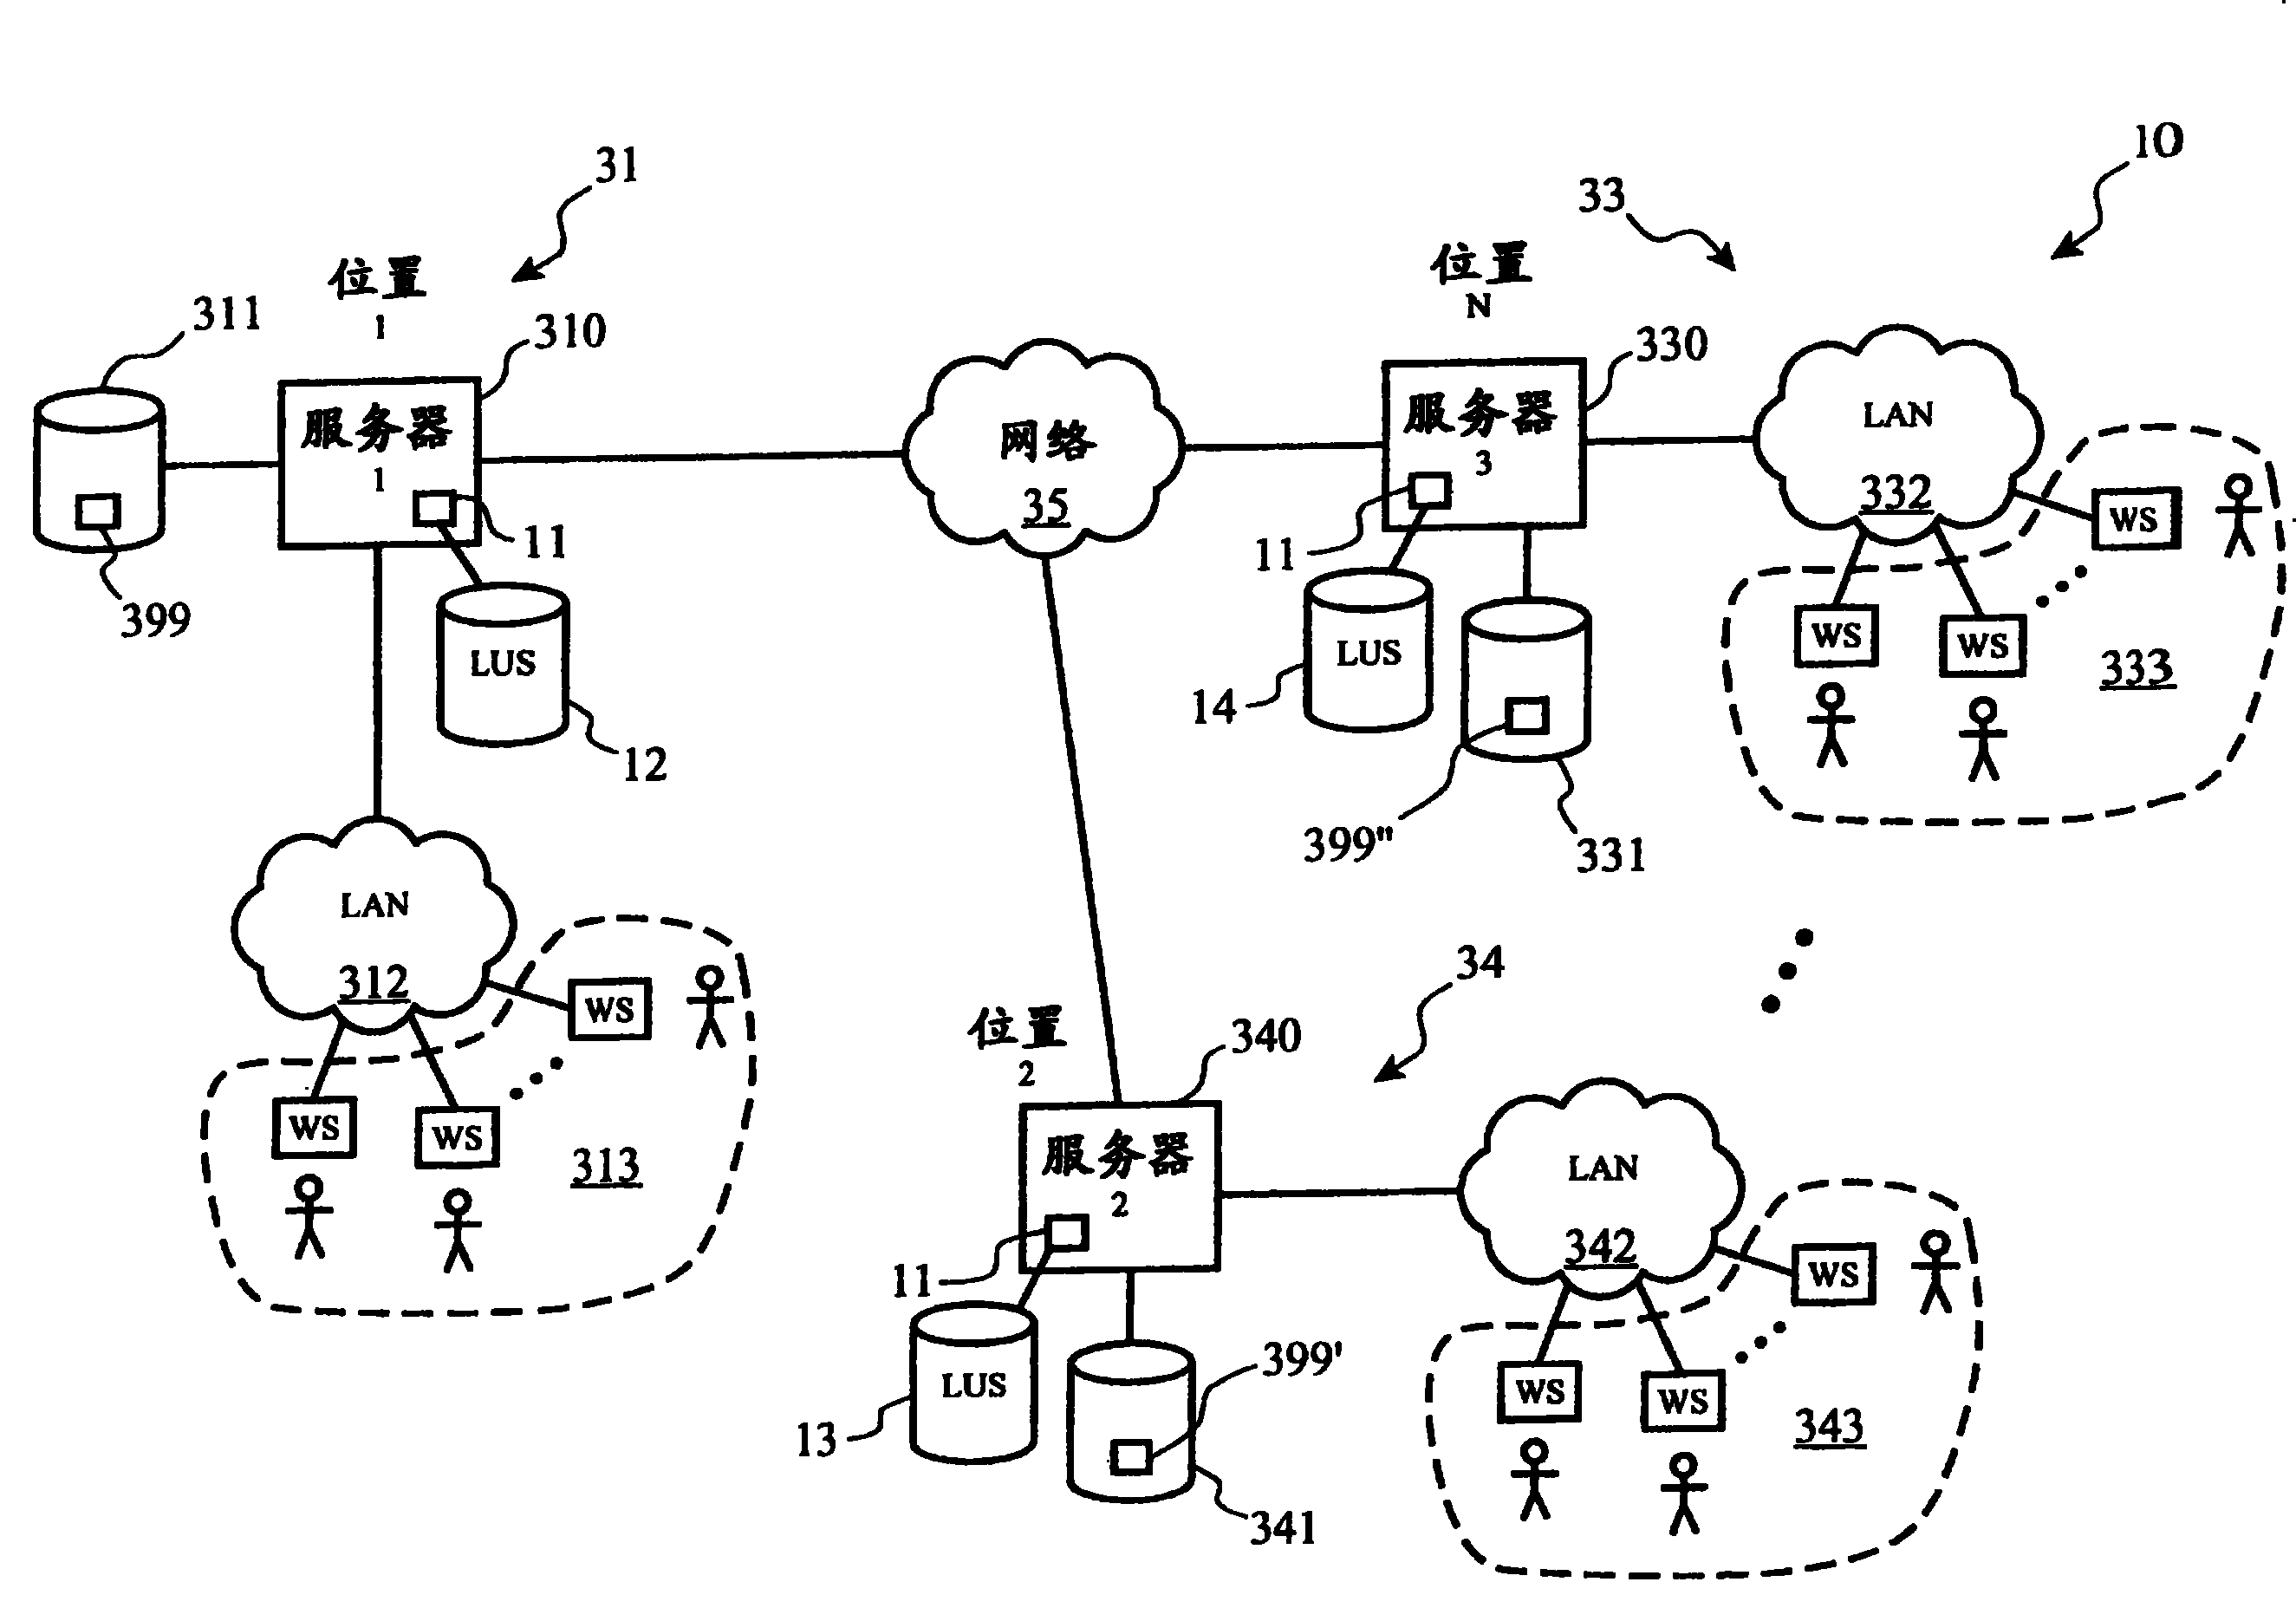 Self-optimizing network attached storage method and system for multiple geographic locations